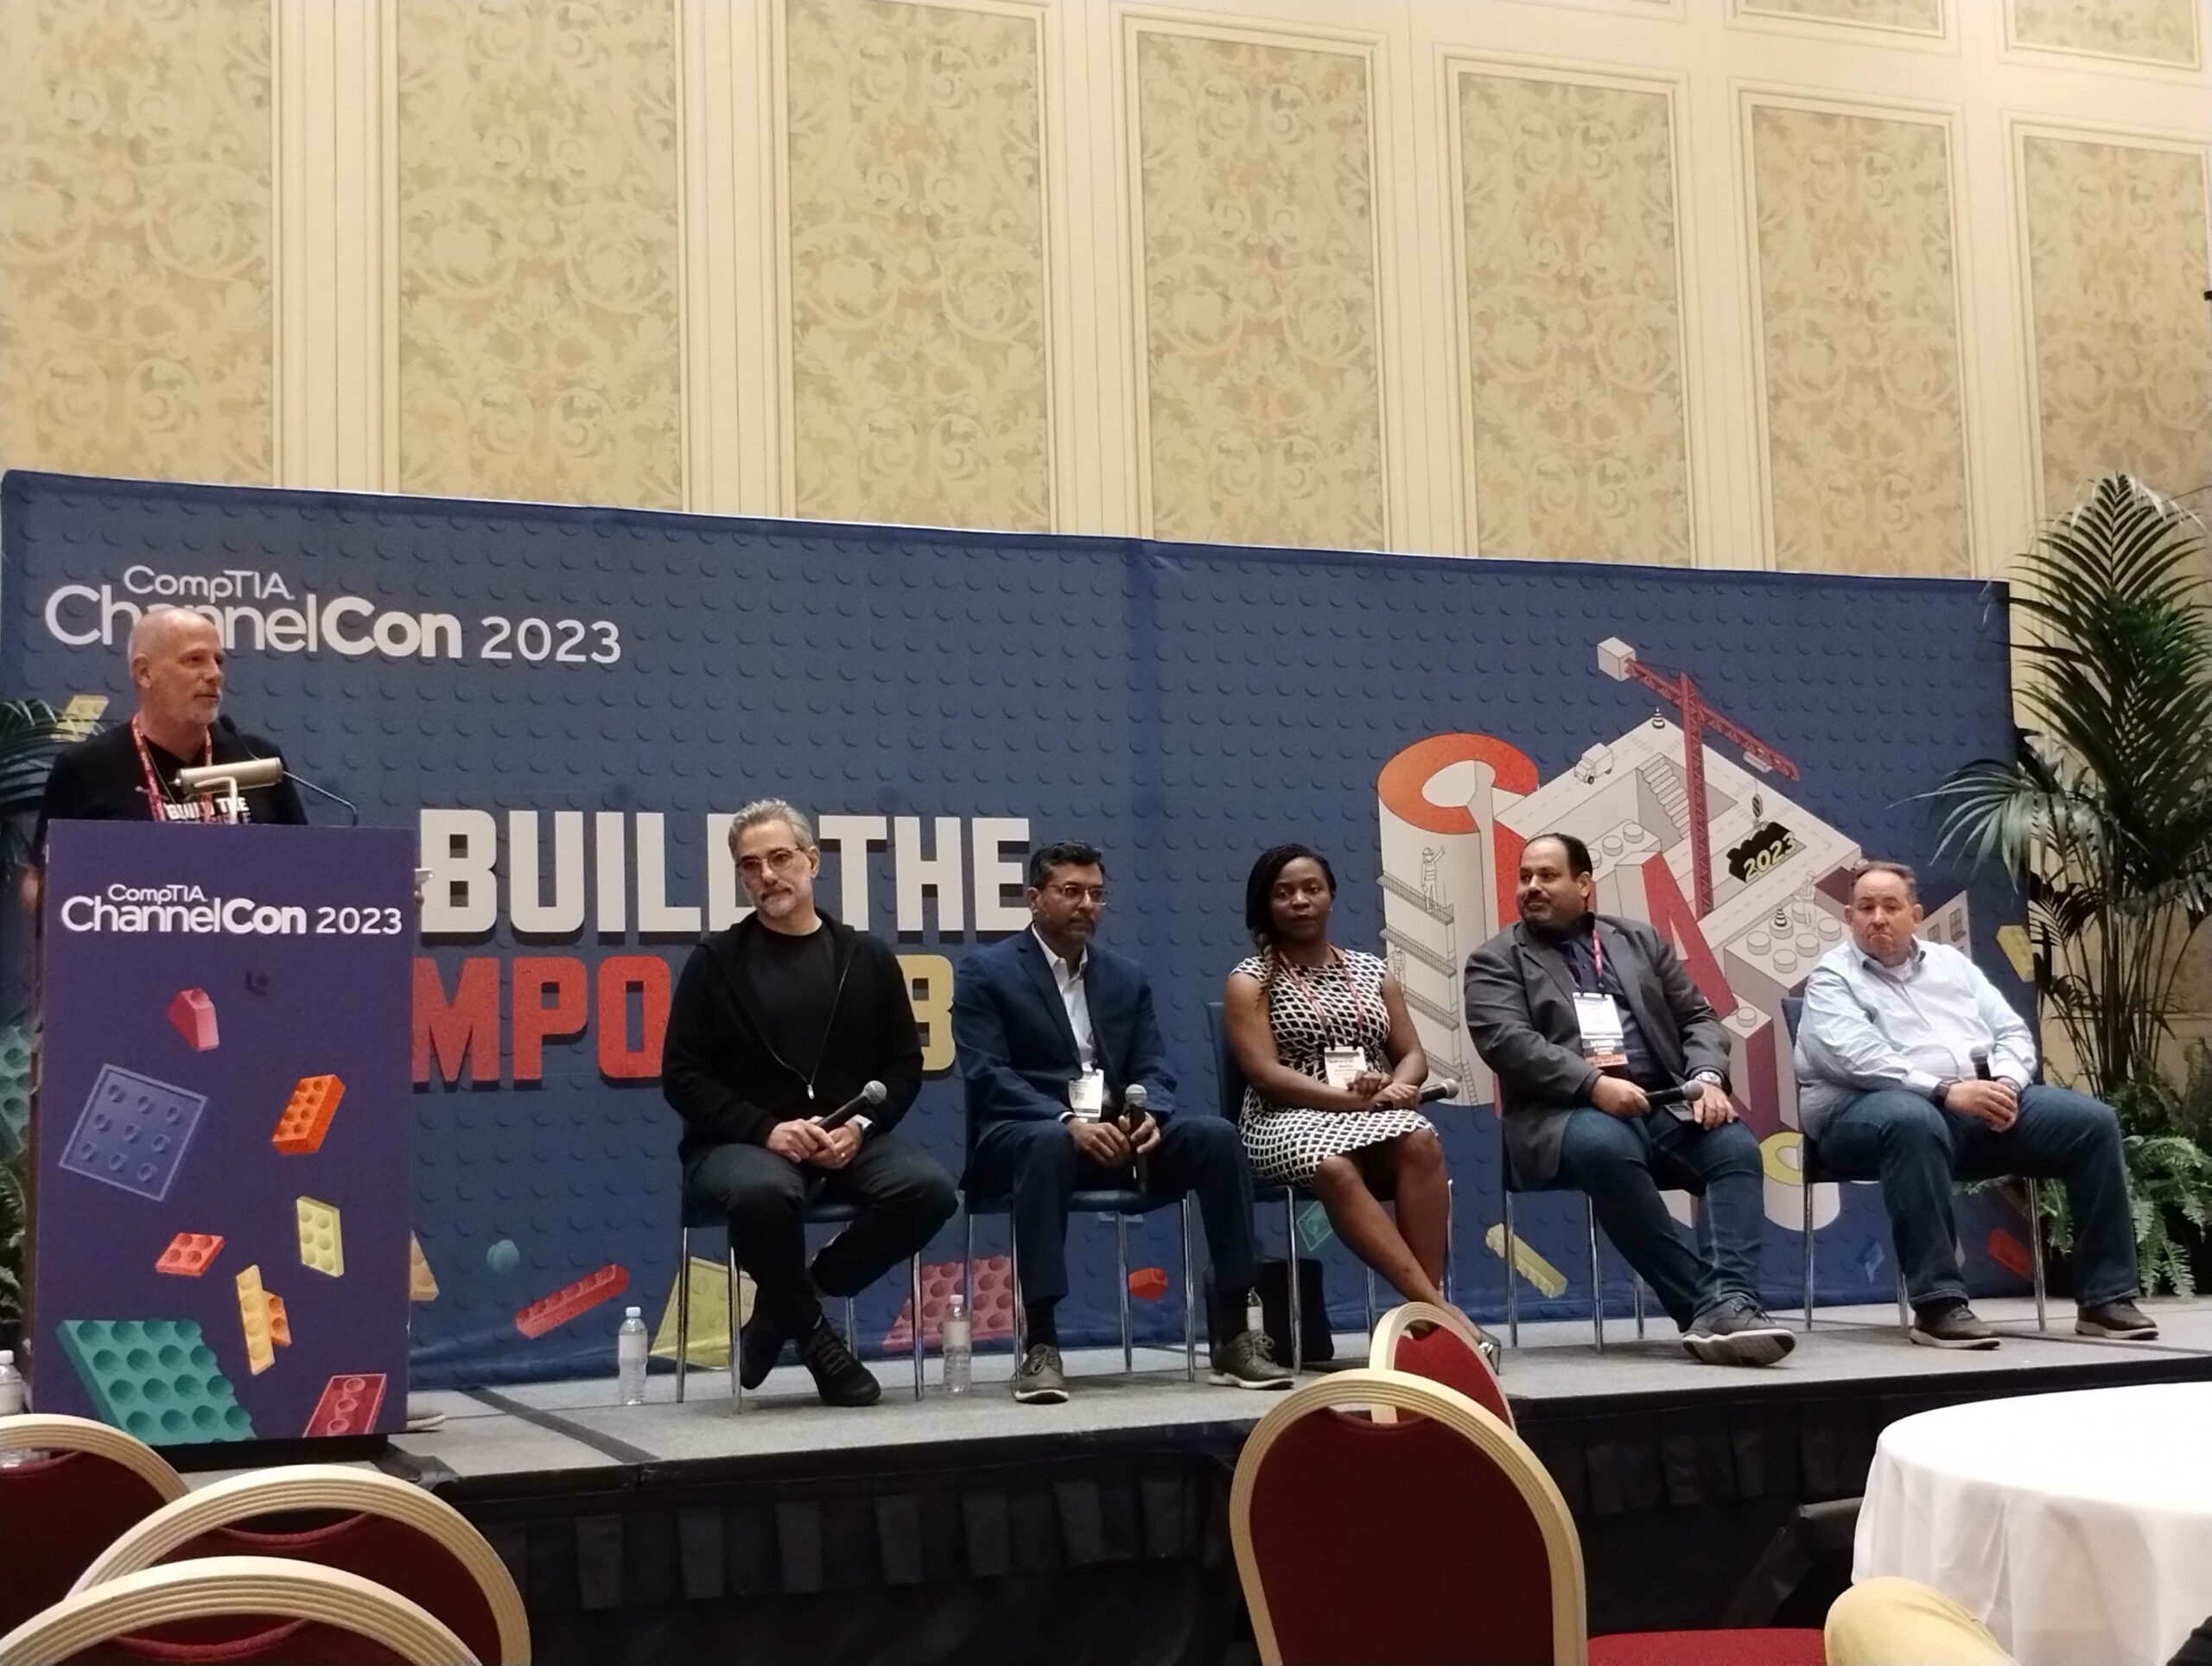 Seminar at ChannelCon 2023 with CompTIA AI Council Panel: "Practical Applications of AI for MSP's". Our very own Mechie Nkengla, PhD sharing the stage with Dr. Seth Dobrin, PhD from Qantm AI, LLC, Manoj Suvarna from Deloitte, Jason Juliano from EisnerAmper, and David Tan from CrushBank.